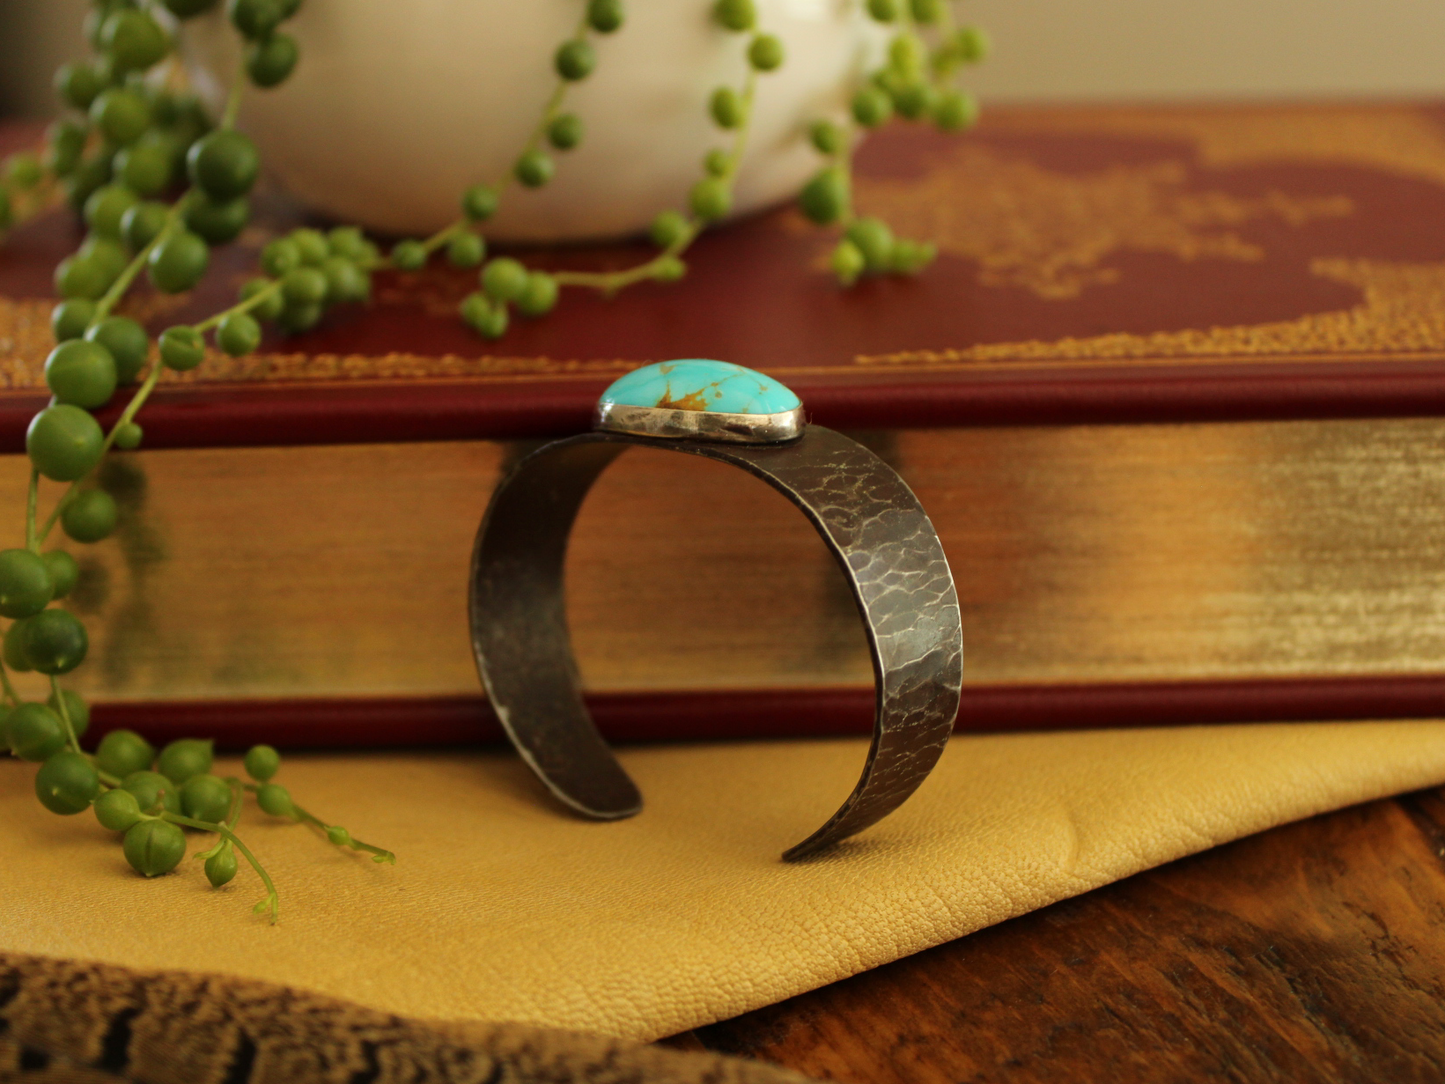 “The Midnight Moon” Cuff With Turquoise